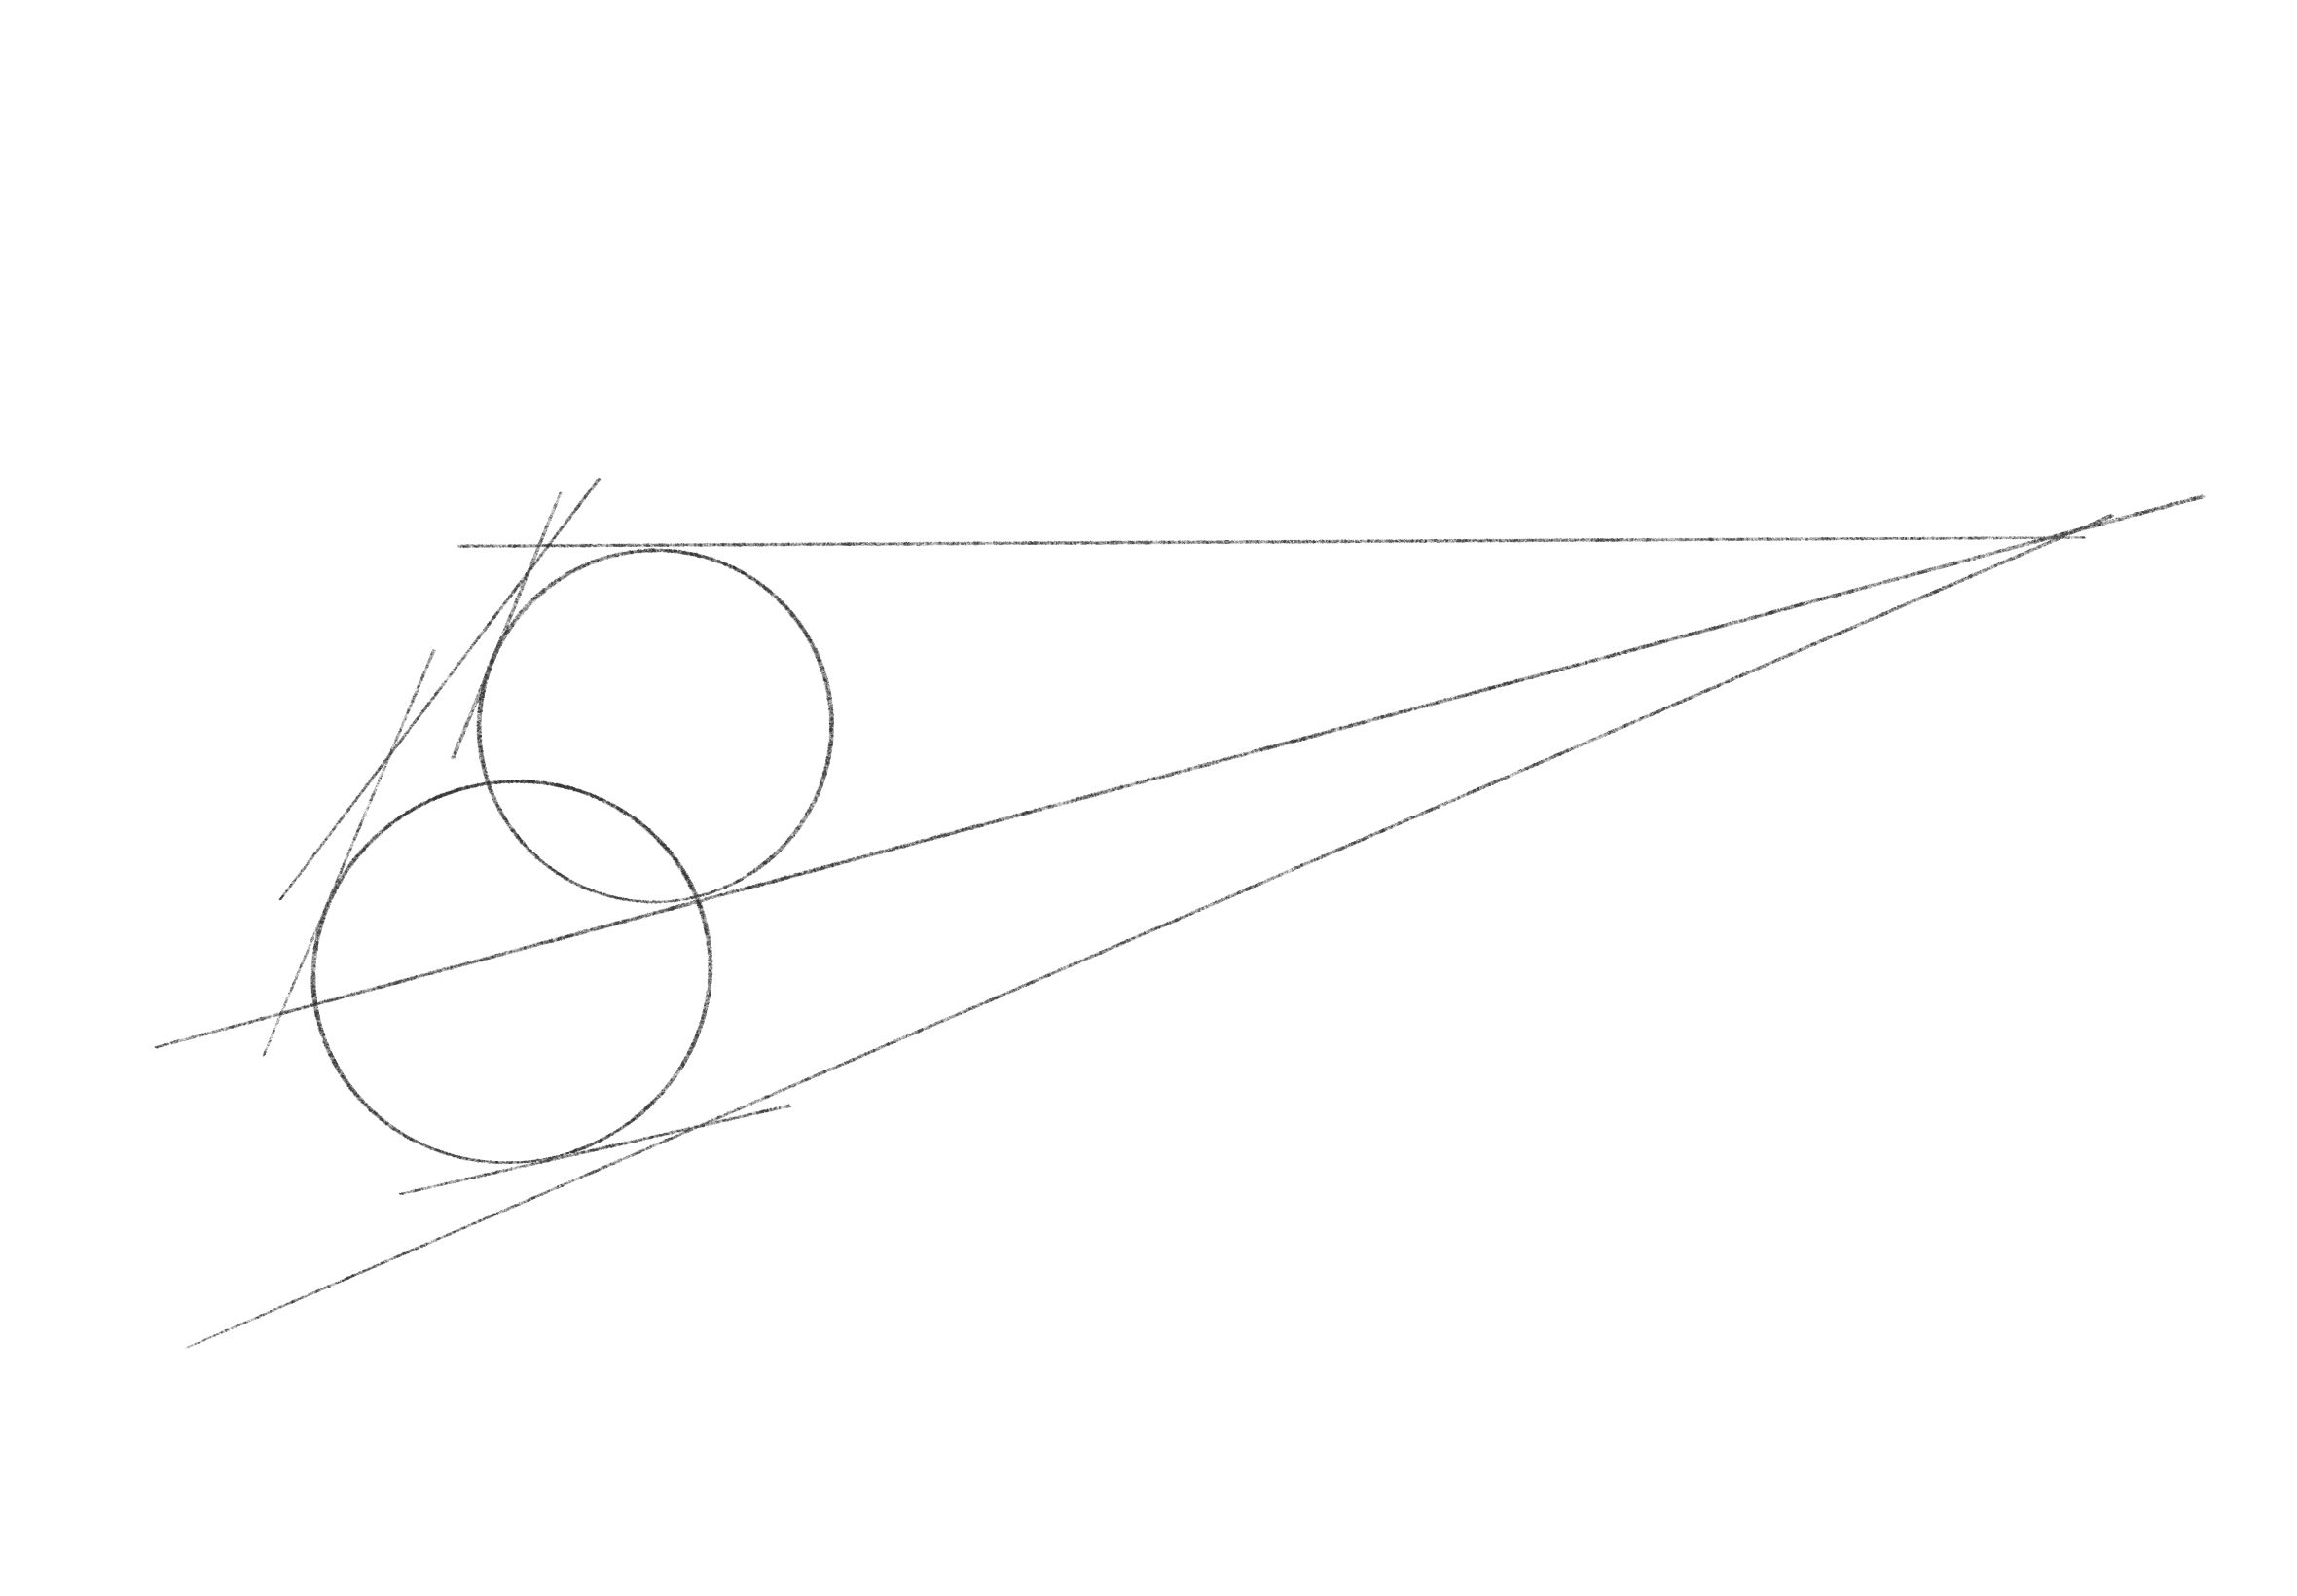 Step 2 of drawing the Nike logo: Form the full curves of the Nike swoosh